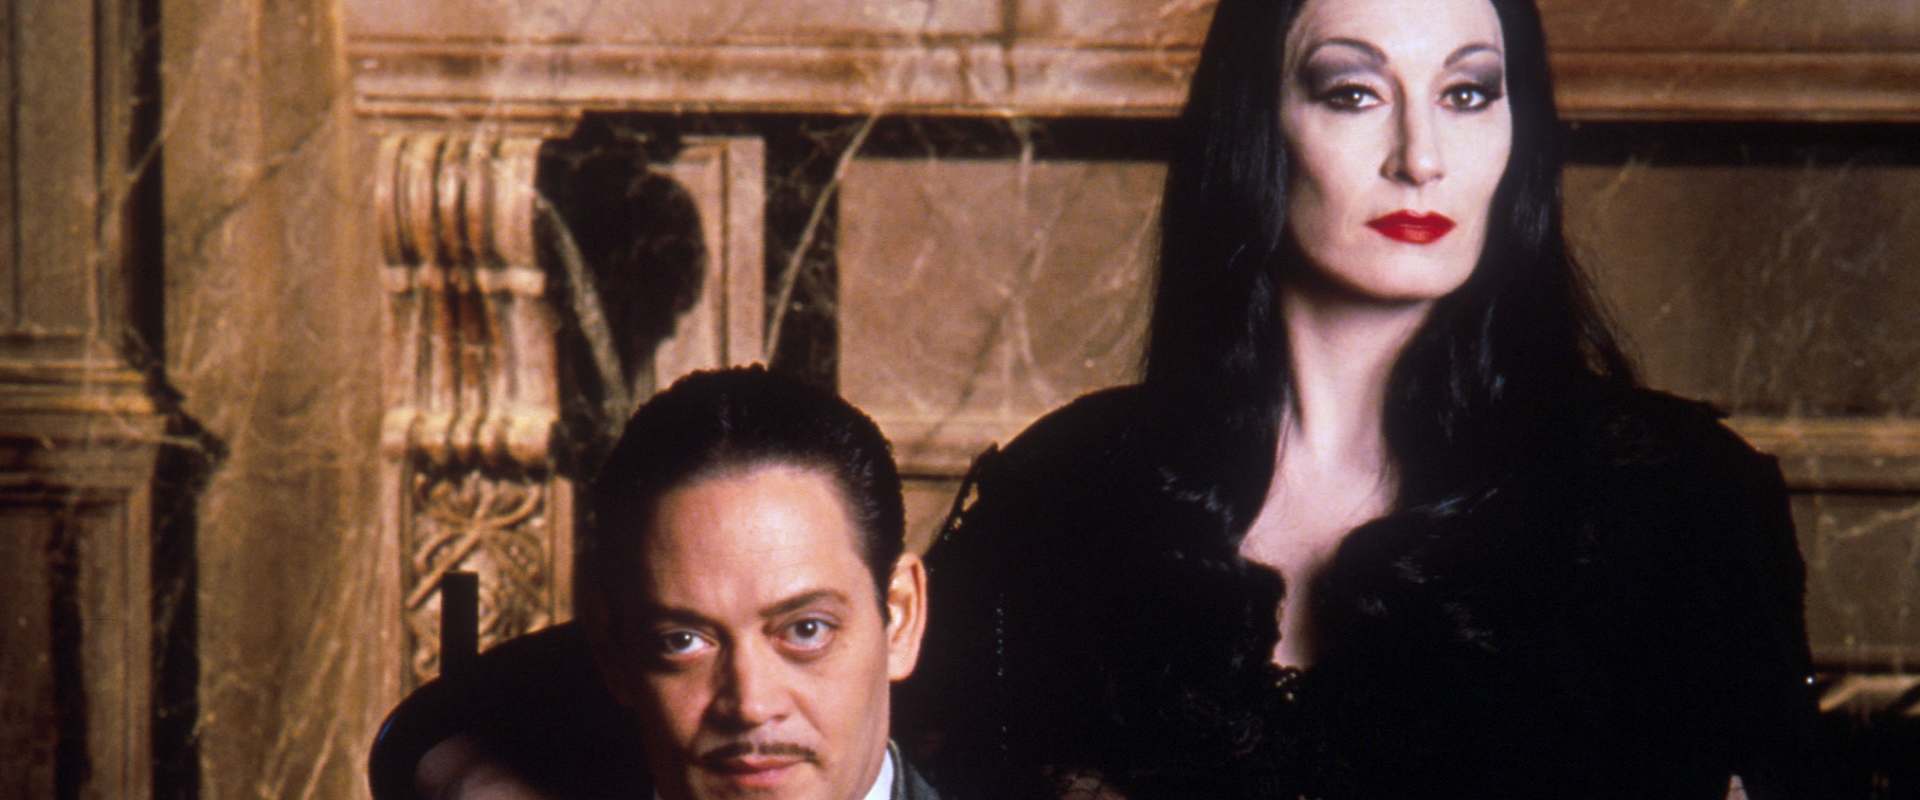 The Addams Family background 2